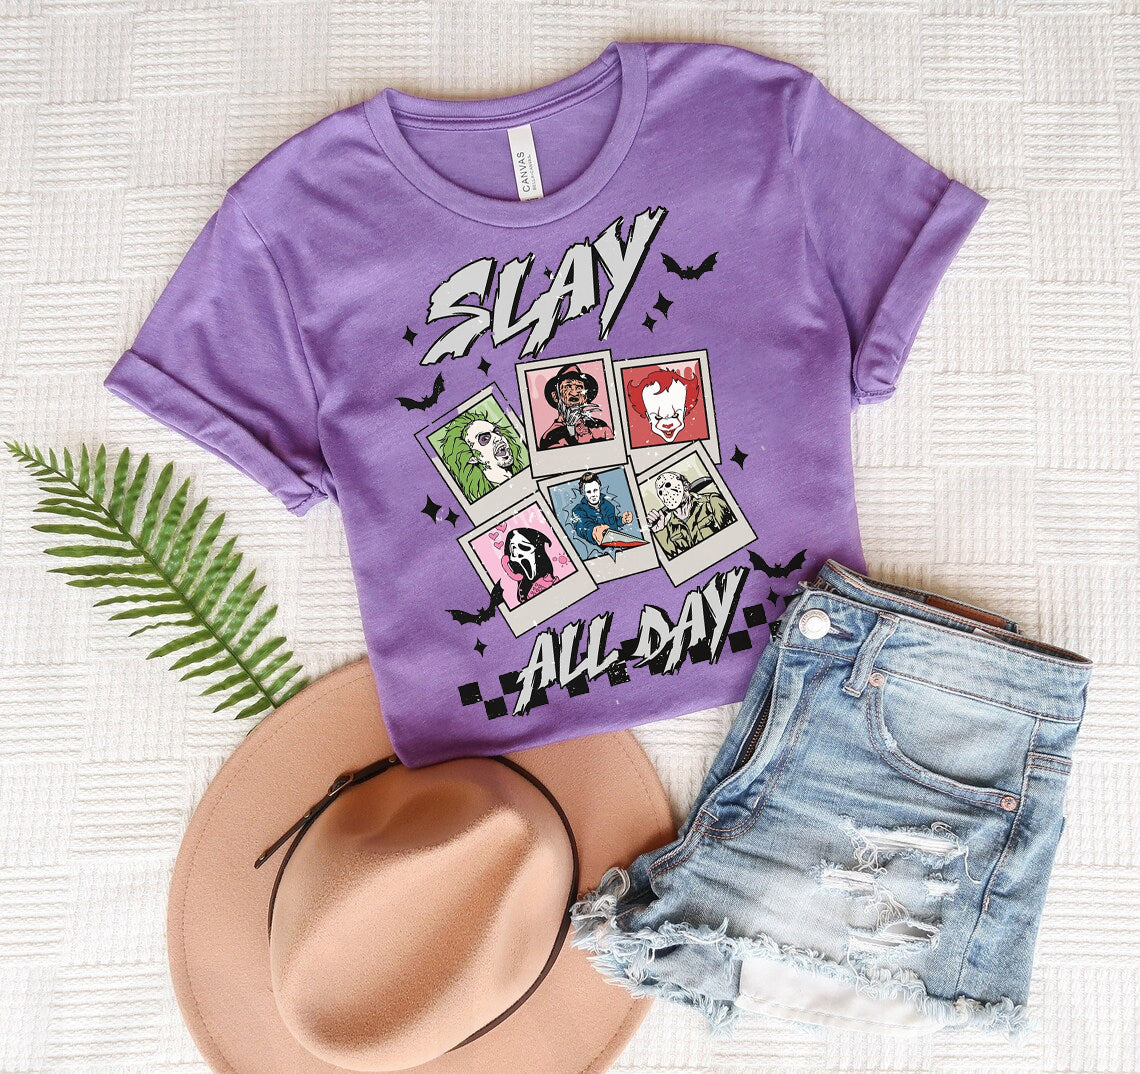 Slay All Day Graphic Tee